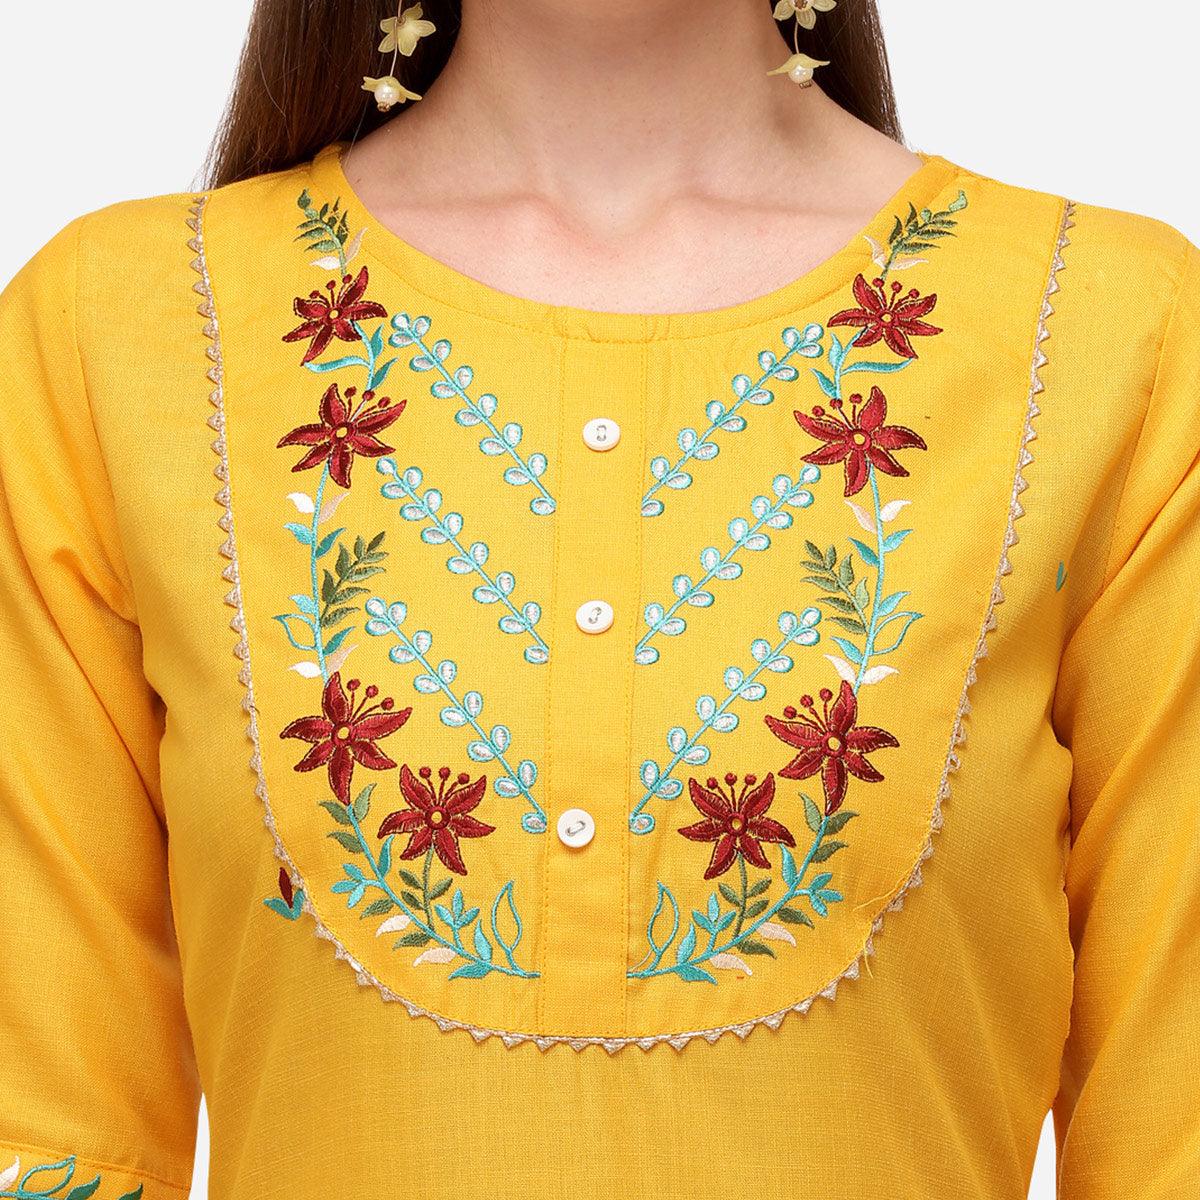 Yellow Casual Wear Floral Embroidered Cotton Kurti Pant Set - Peachmode